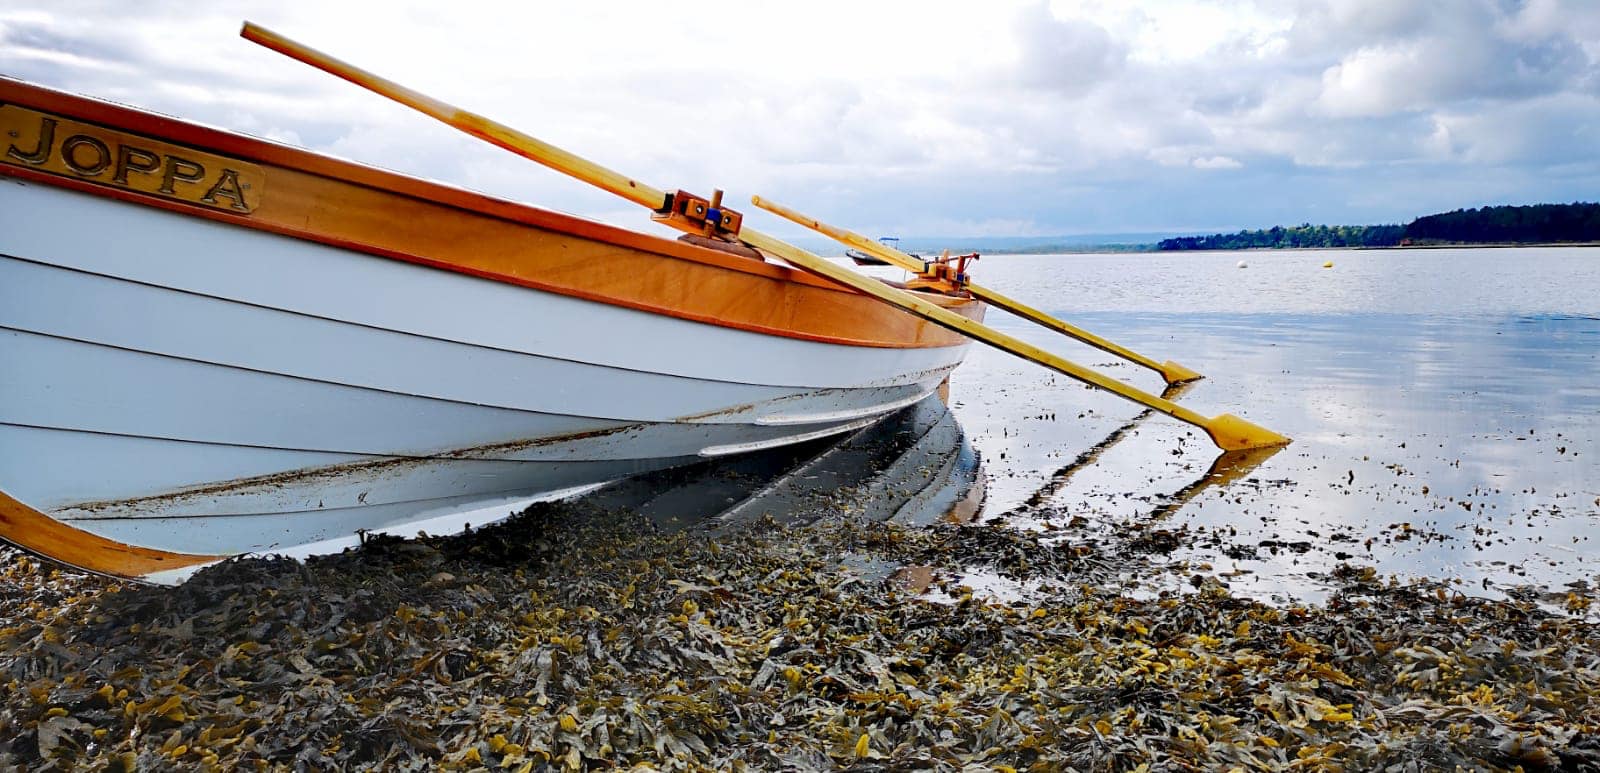 Findhorn rowing regatta takes place this weekend.